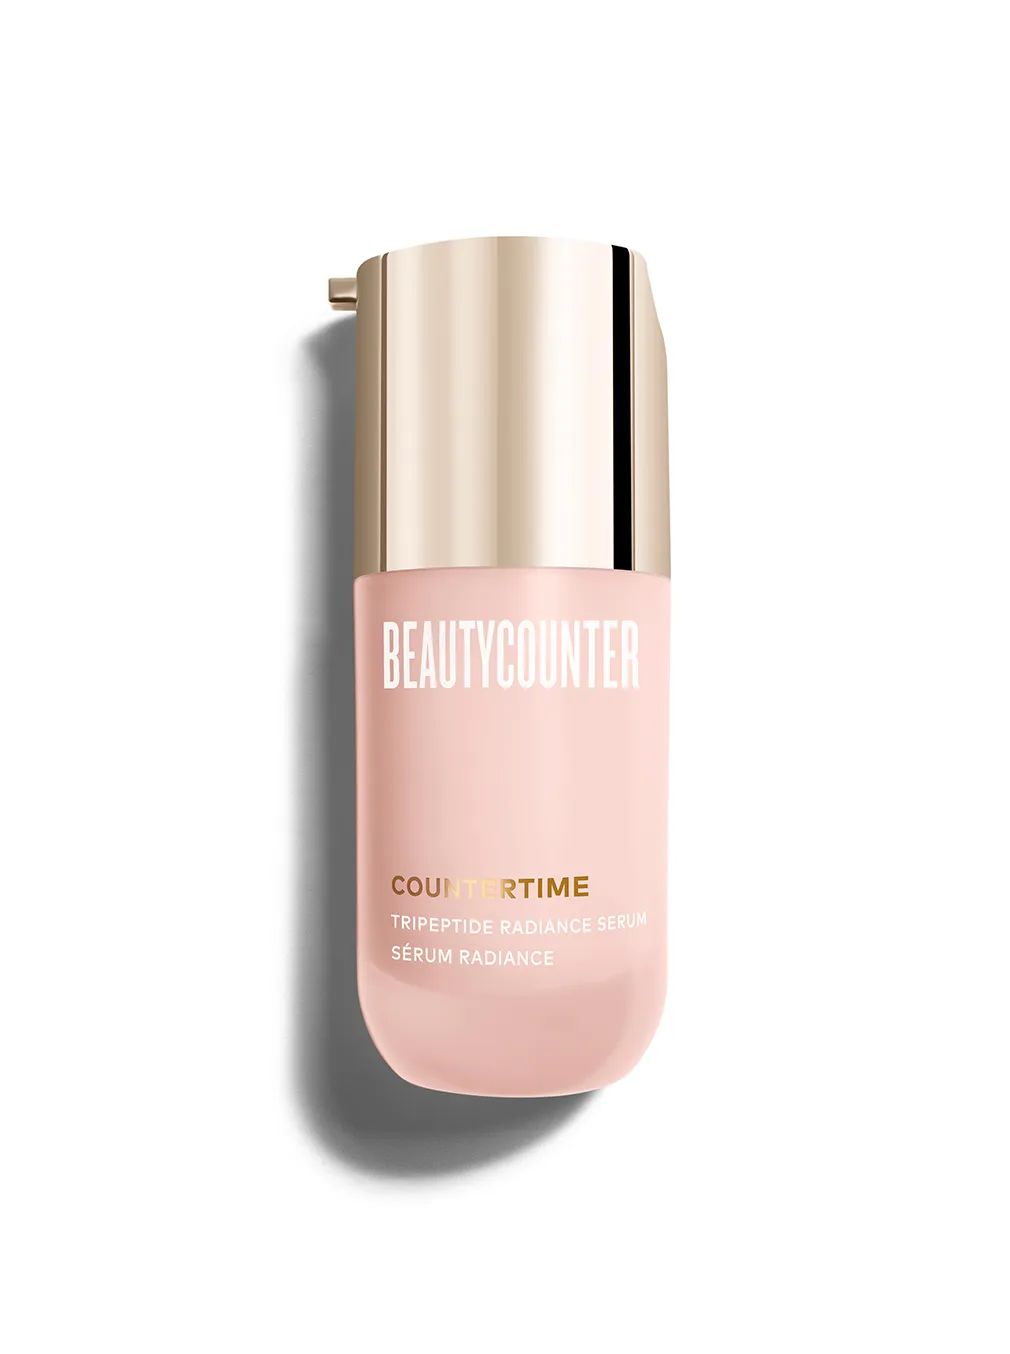 Countertime Tripeptide Radiance Serum - Beautycounter - Skin Care, Makeup, Bath and Body and more... | Beautycounter.com